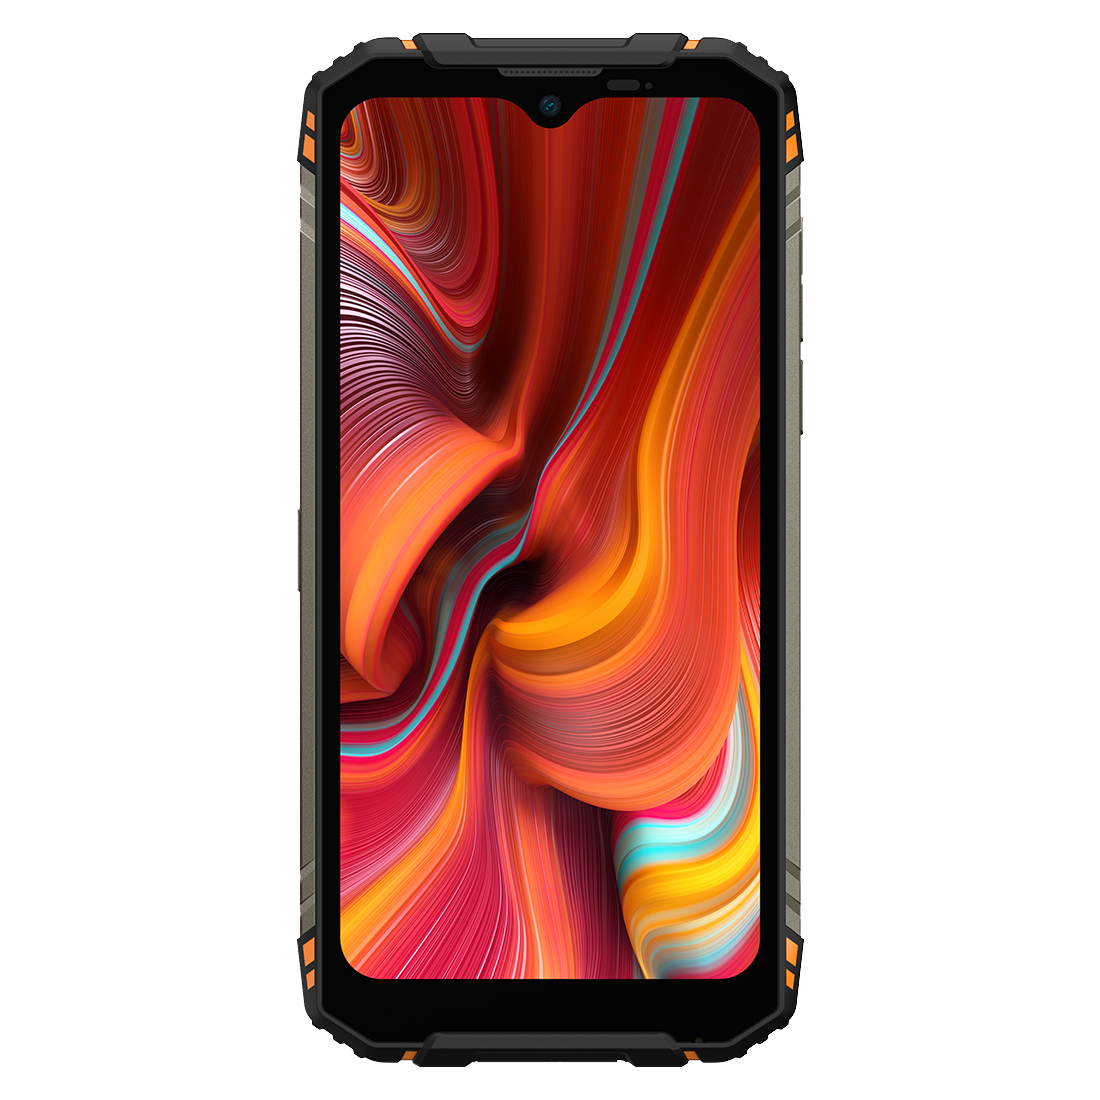 Find DOOGEE S96 Pro Global Bands IP68 IP69K 8GB 128GB Helio G90 NFC Android 10 6350mAh 6 22 inch 48MP Round Quad Camera 20MP Infrared Night Vision 4G Smartphone for Sale on Gipsybee.com with cryptocurrencies